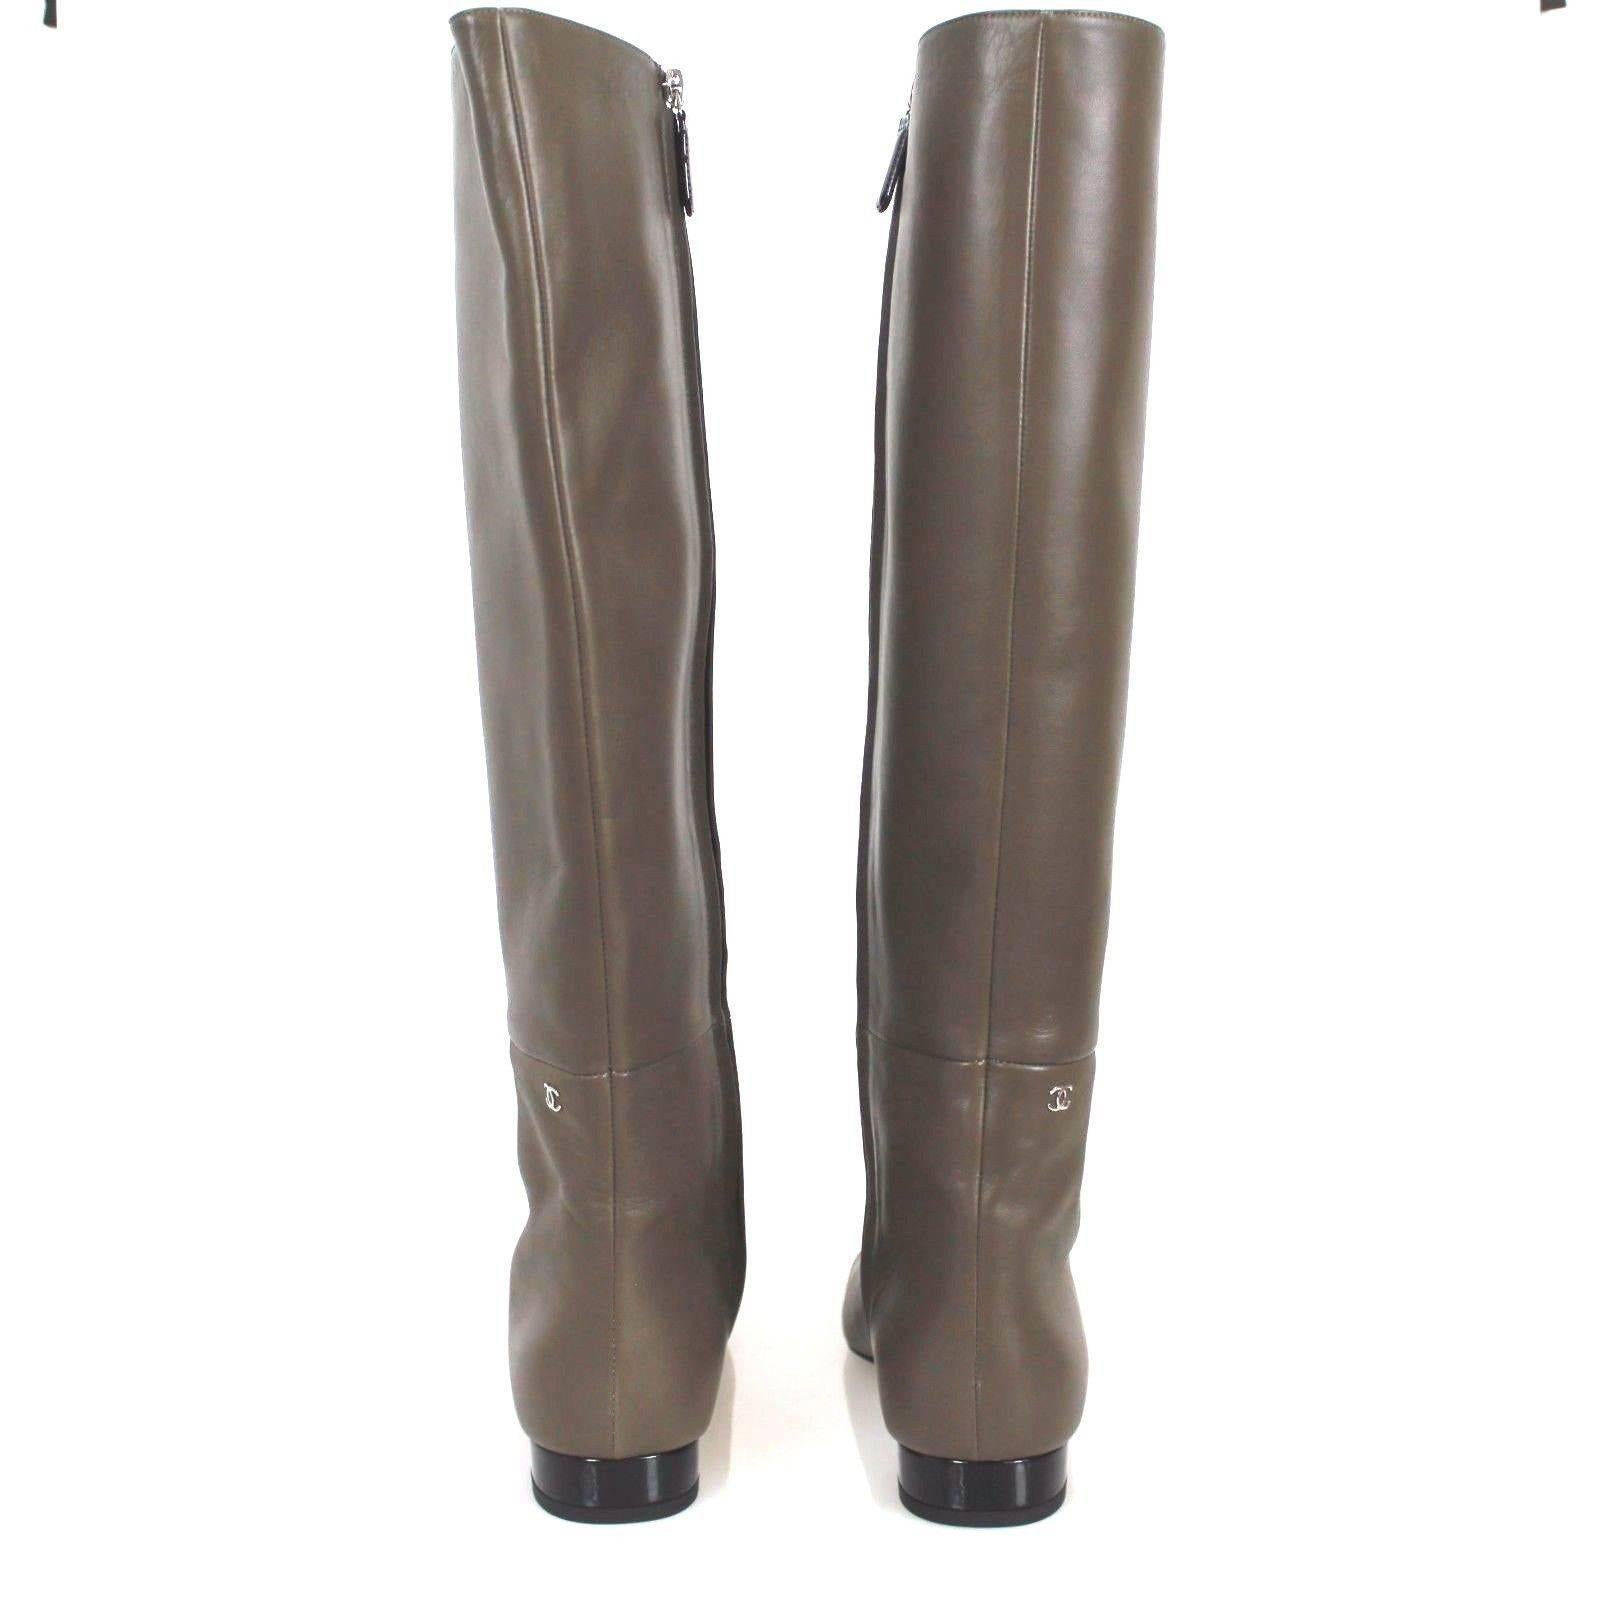 Chanel 2015 riding equestrian style boots, perfect for this fall and winter!
Dark Brown taupe leather with patent leather black cap toes, lined with tan leather.

38.5 EU.

DOES NOT INCLUDE TAGS AND BOX 

Includes: Dust bag
